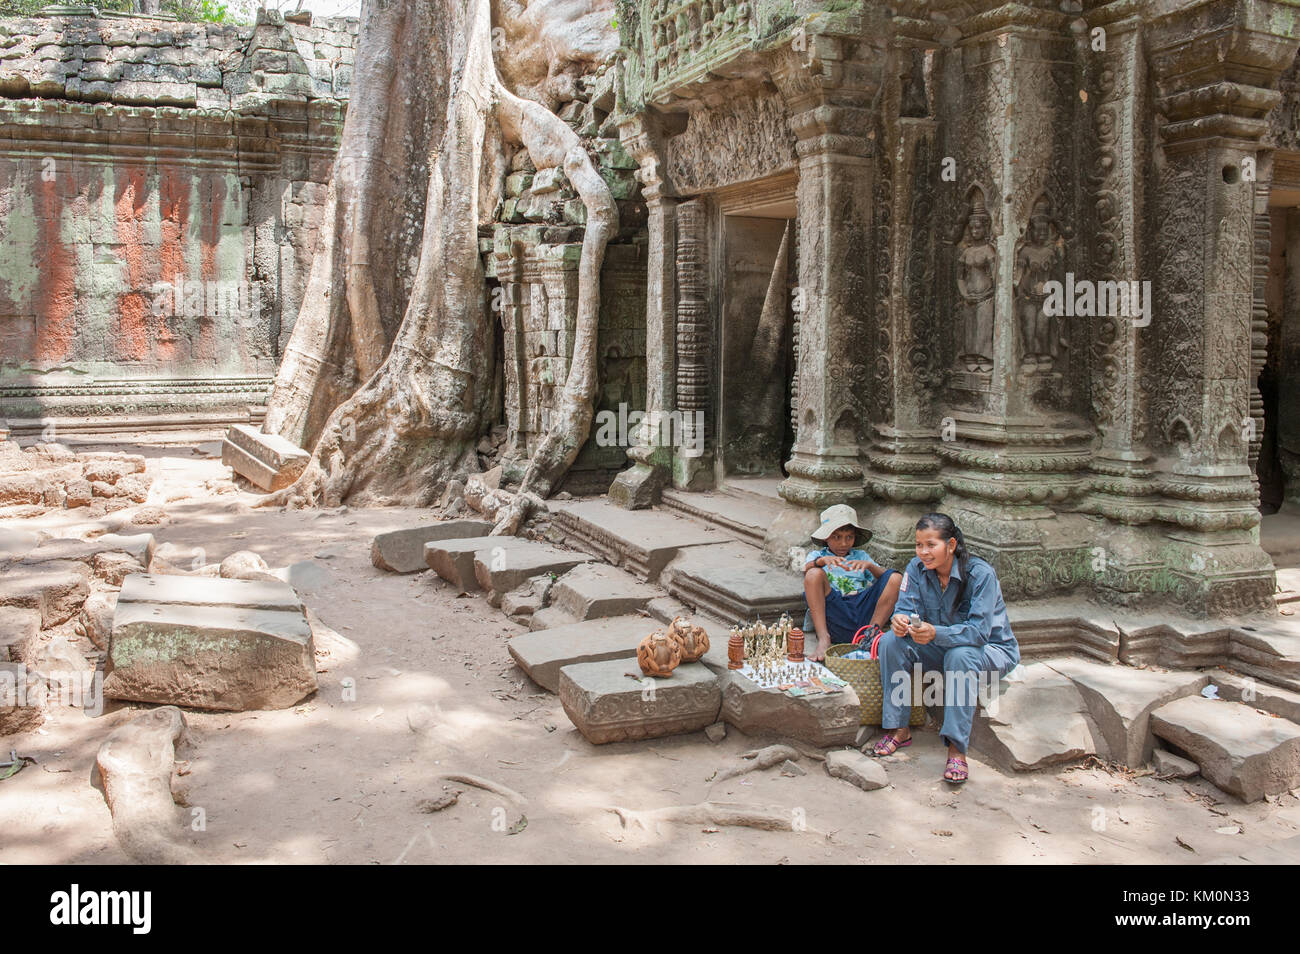 Khmer vendor at Ta Prohm in Siem Reap. Built in 12-13th century Ta Prohm was later the location for the movie Tomb Raider. Stock Photo